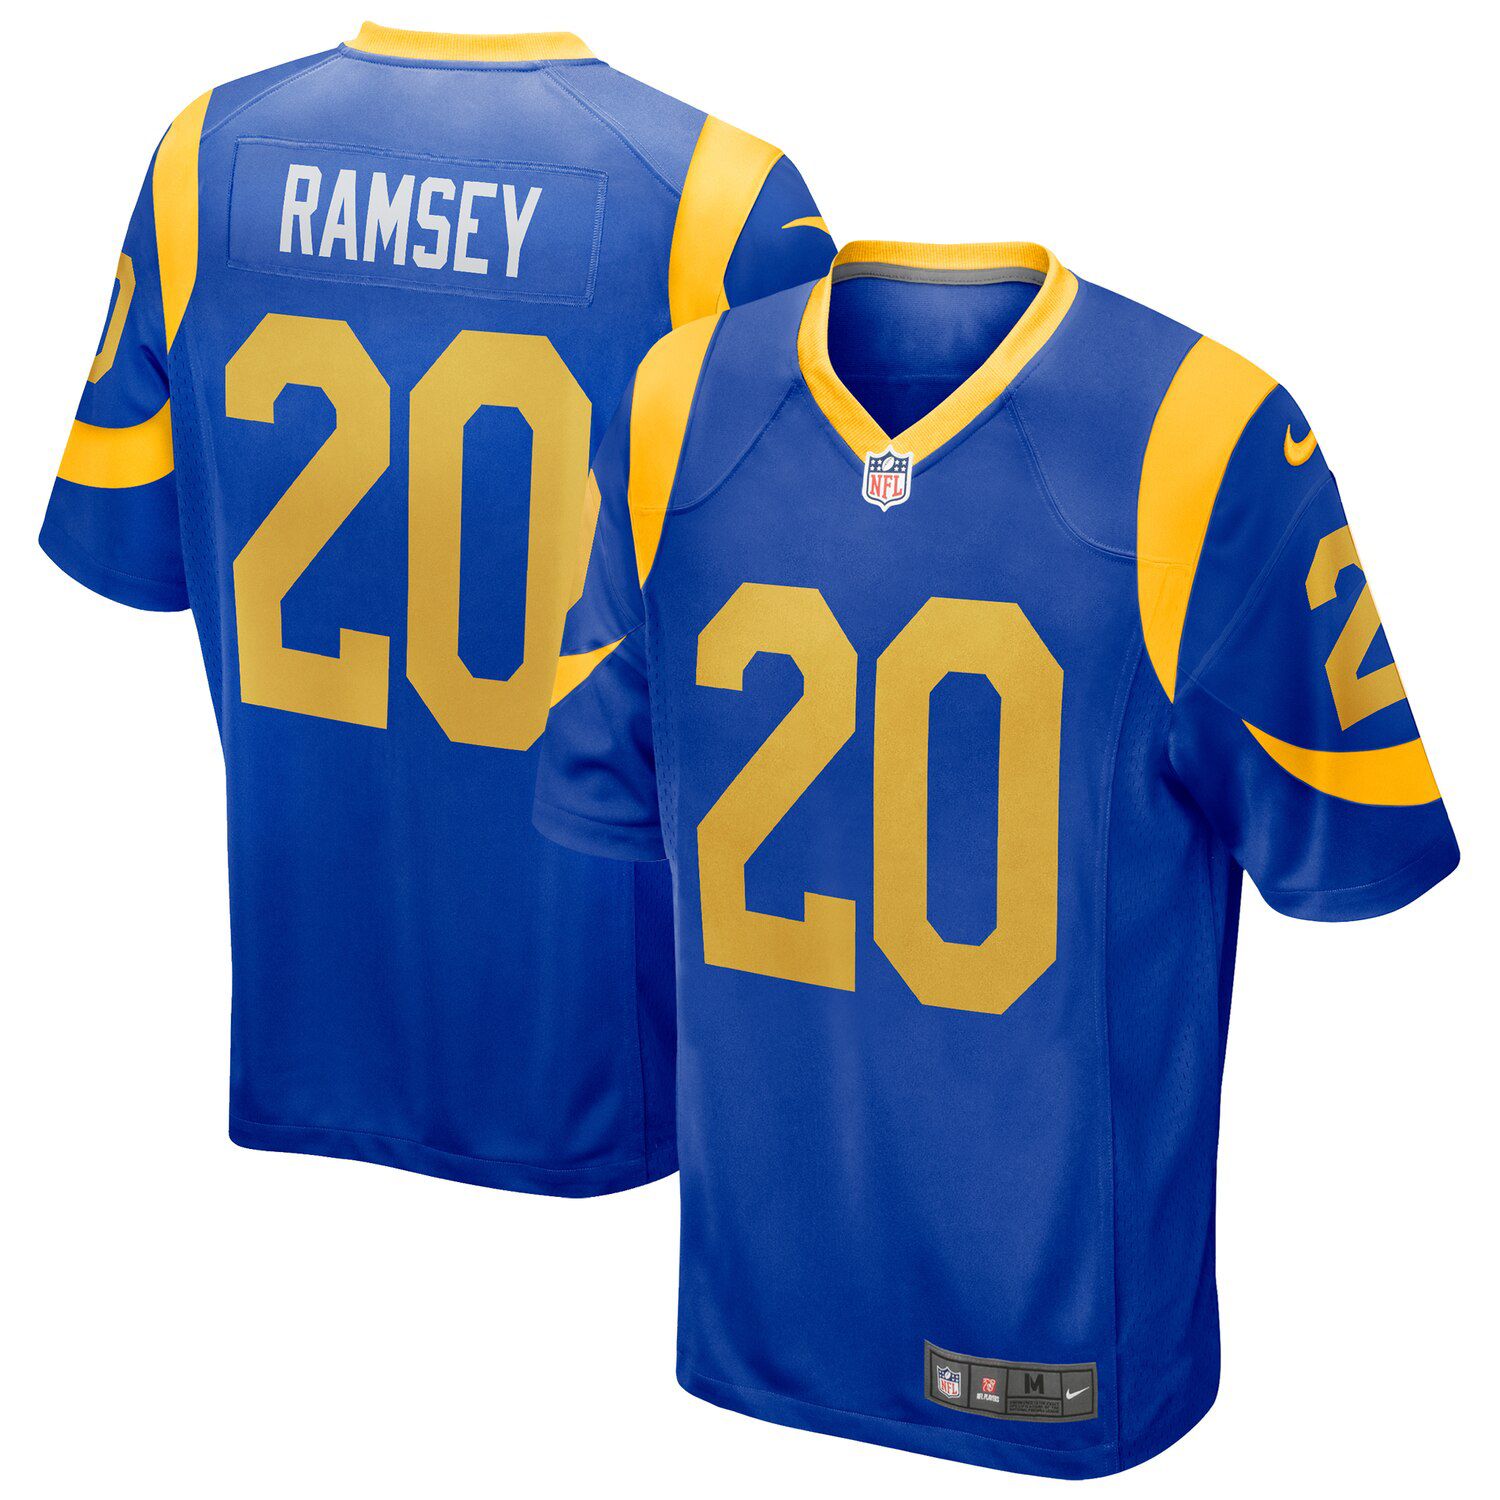 ramsey jersey number